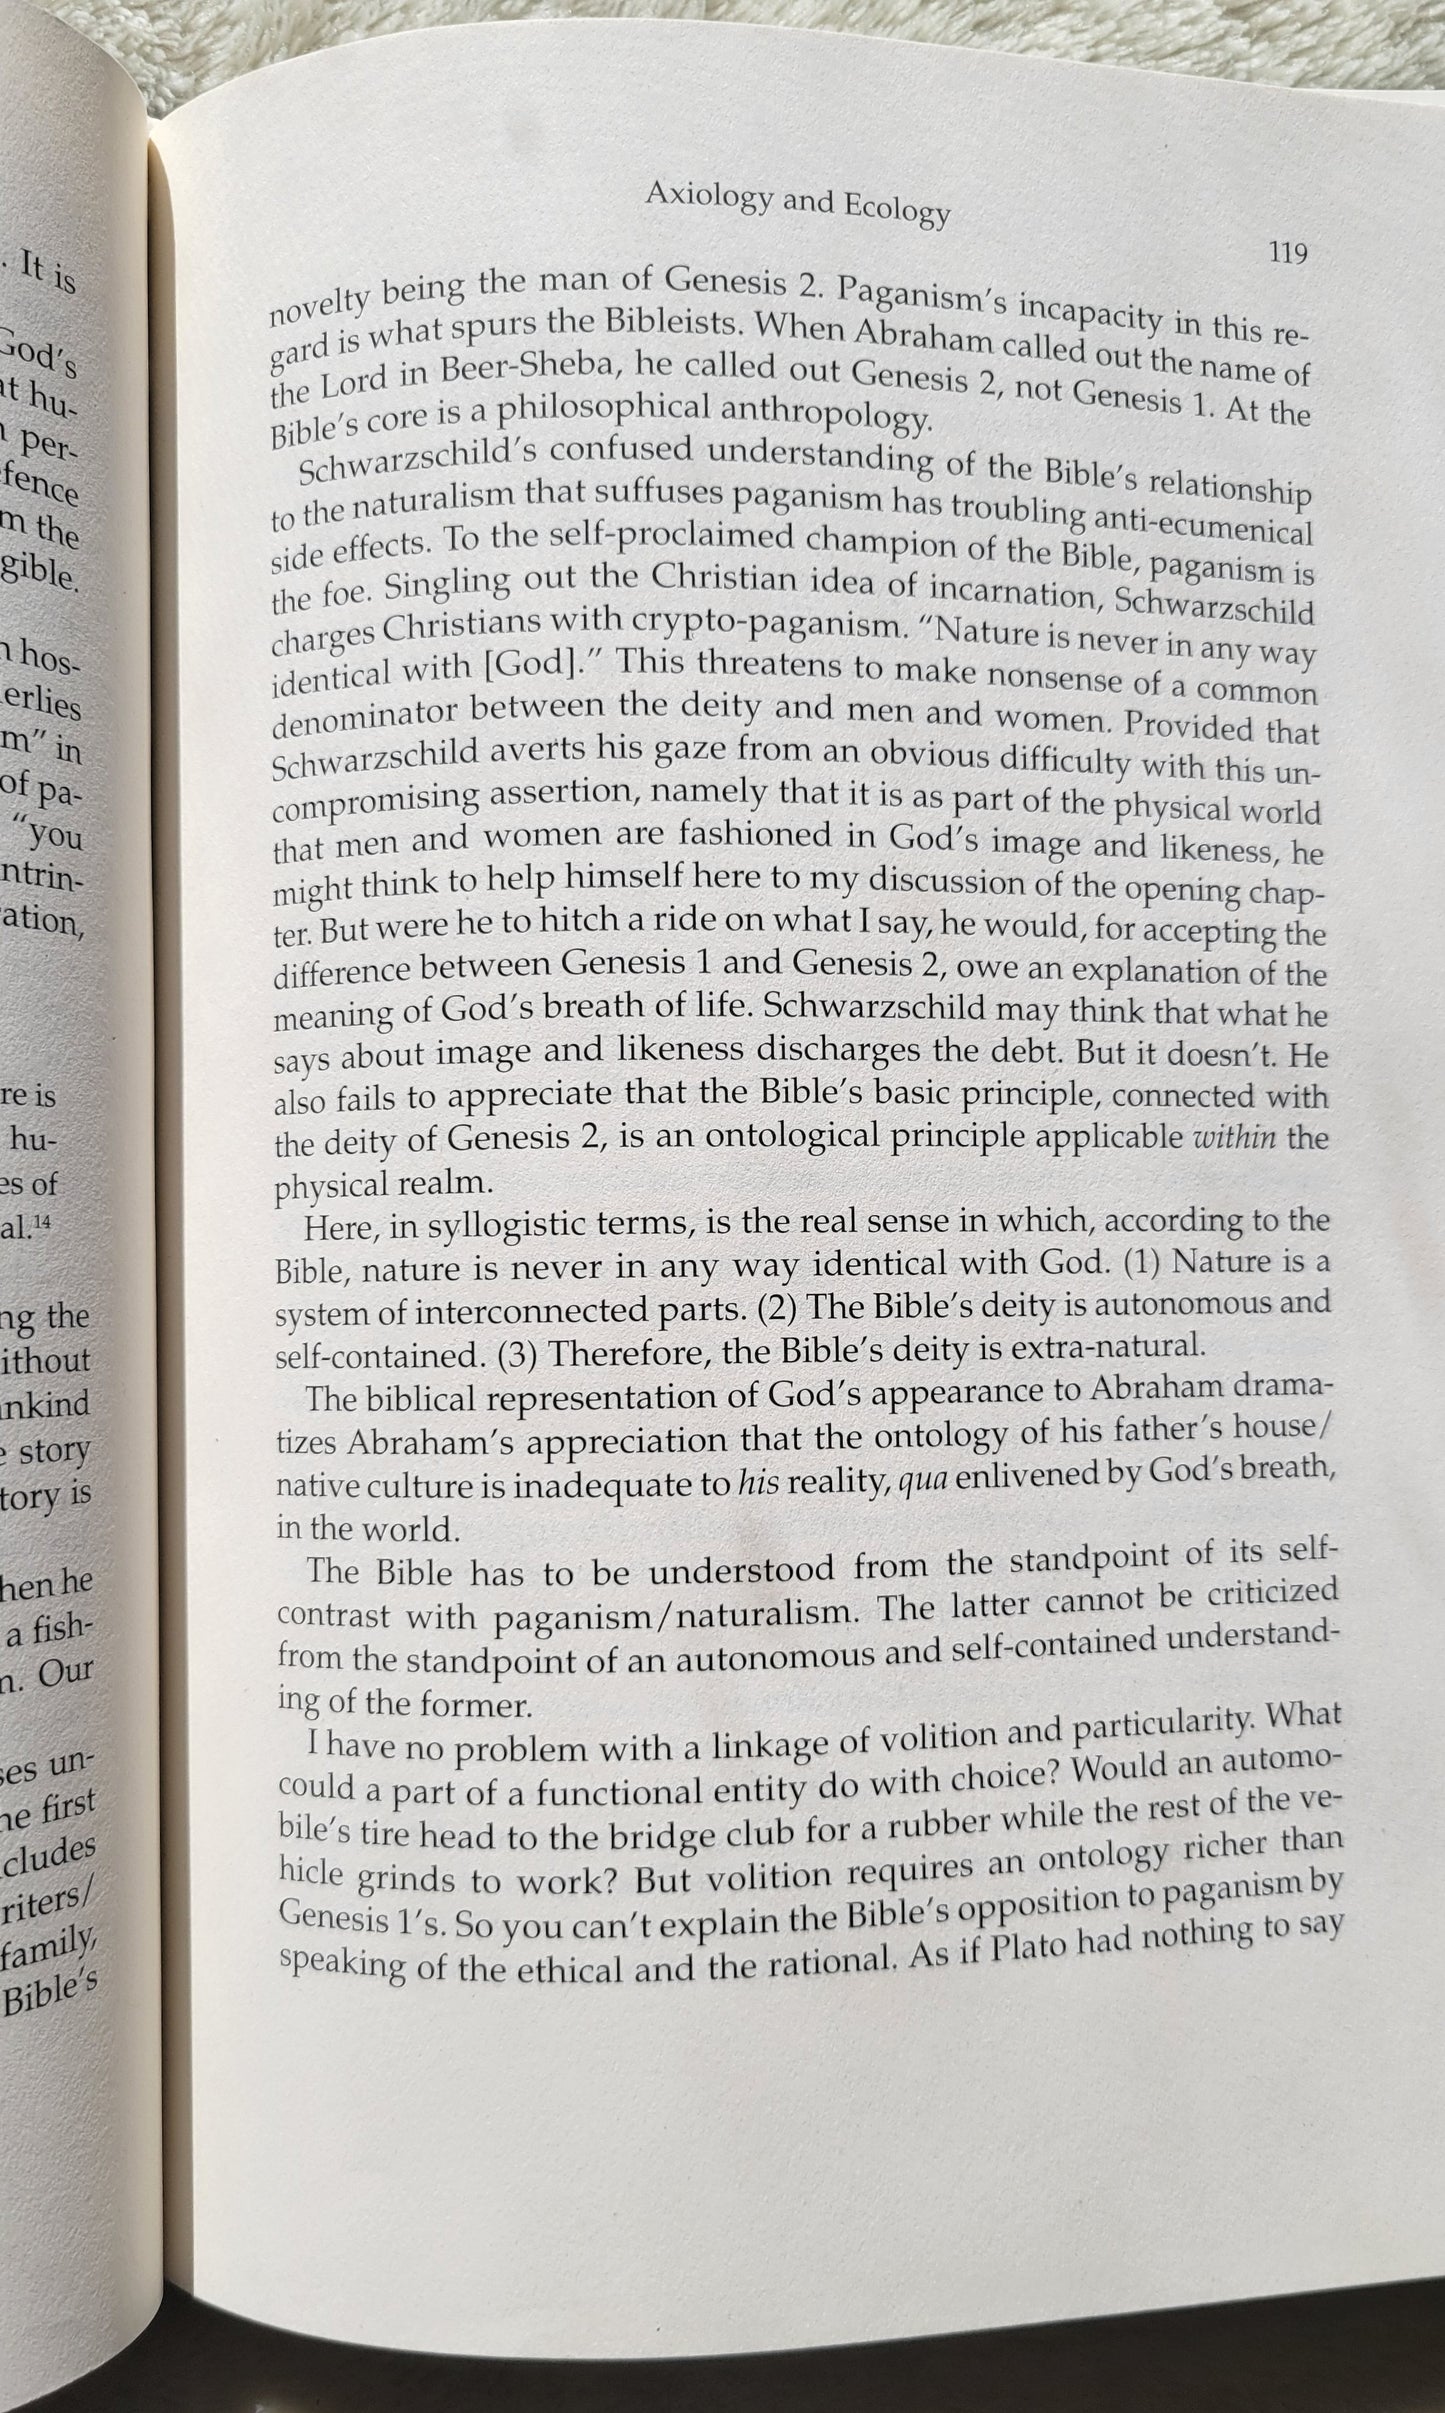 Used book for sale "I Am: Monotheism and the Philosophy of the Bible" by Mark Glouberman, University of Toronto Press, 2019. View of page 319.